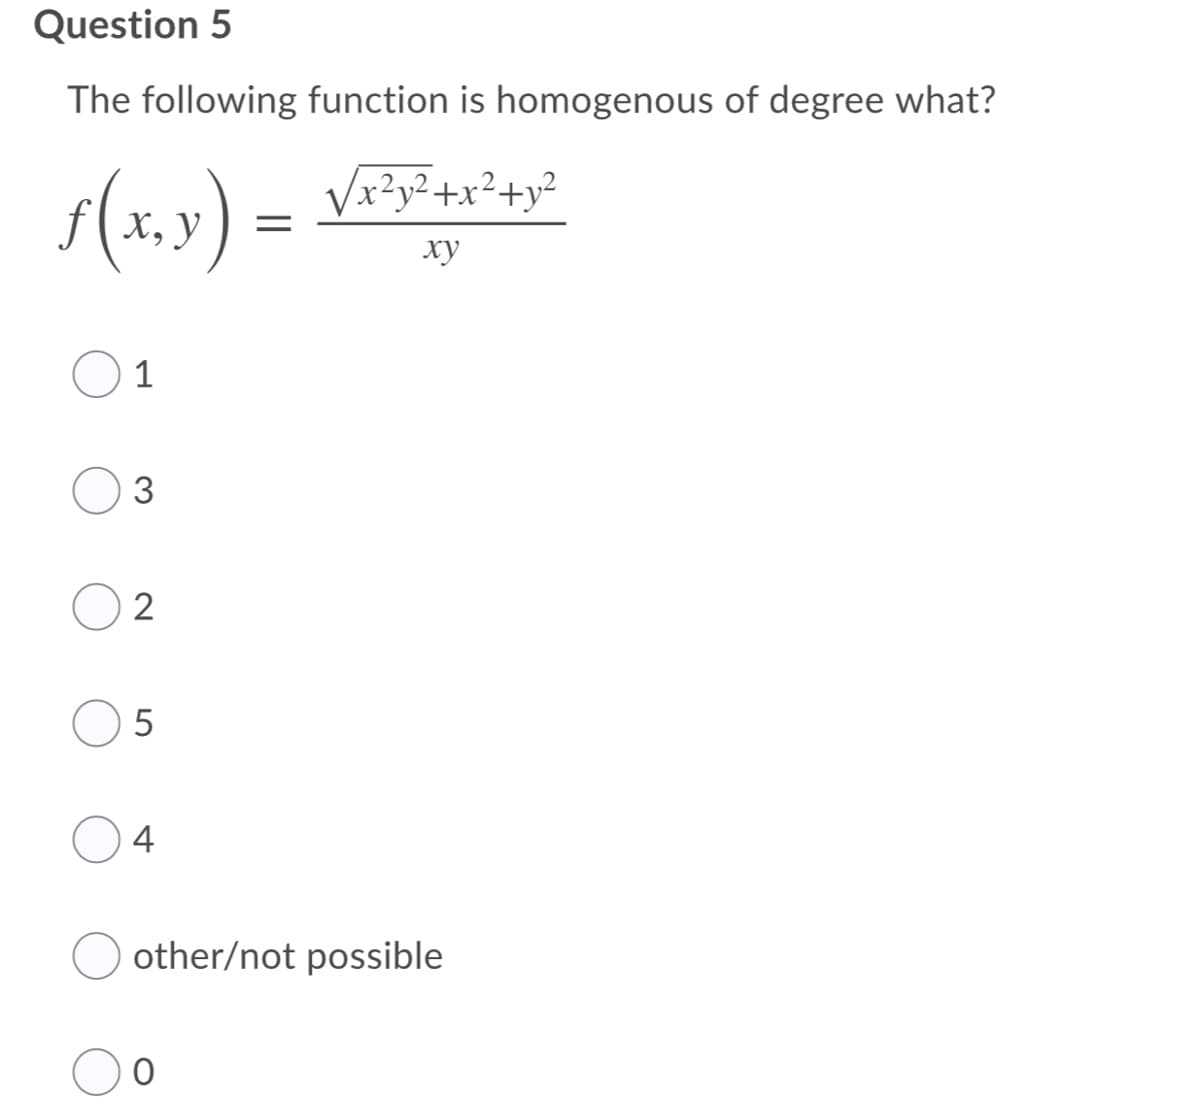 Question 5
The following function is homogenous of degree what?
(x.x) =
Vx?y²+x²+y²
f(x,y) =
х, у
ху
1
3
2
4
other/not possible
